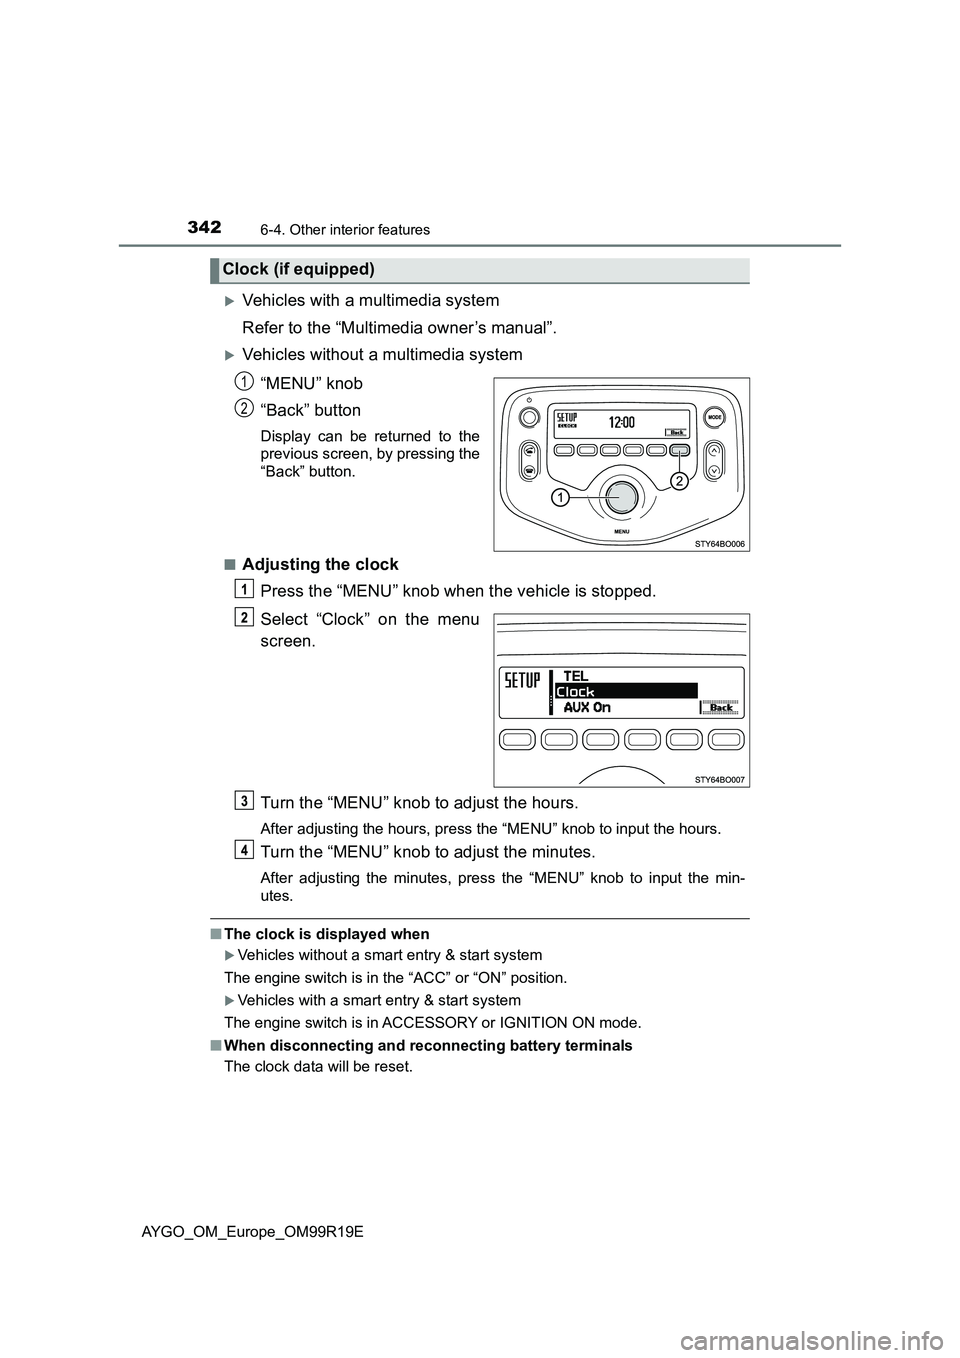 TOYOTA AYGO 2019  Owners Manual (in English) 3426-4. Other interior features
AYGO_OM_Europe_OM99R19E
Vehicles with a multimedia system 
Refer to the “Multimedia owner’s manual”.
Vehicles without a multimedia system 
“MENU” knob 
